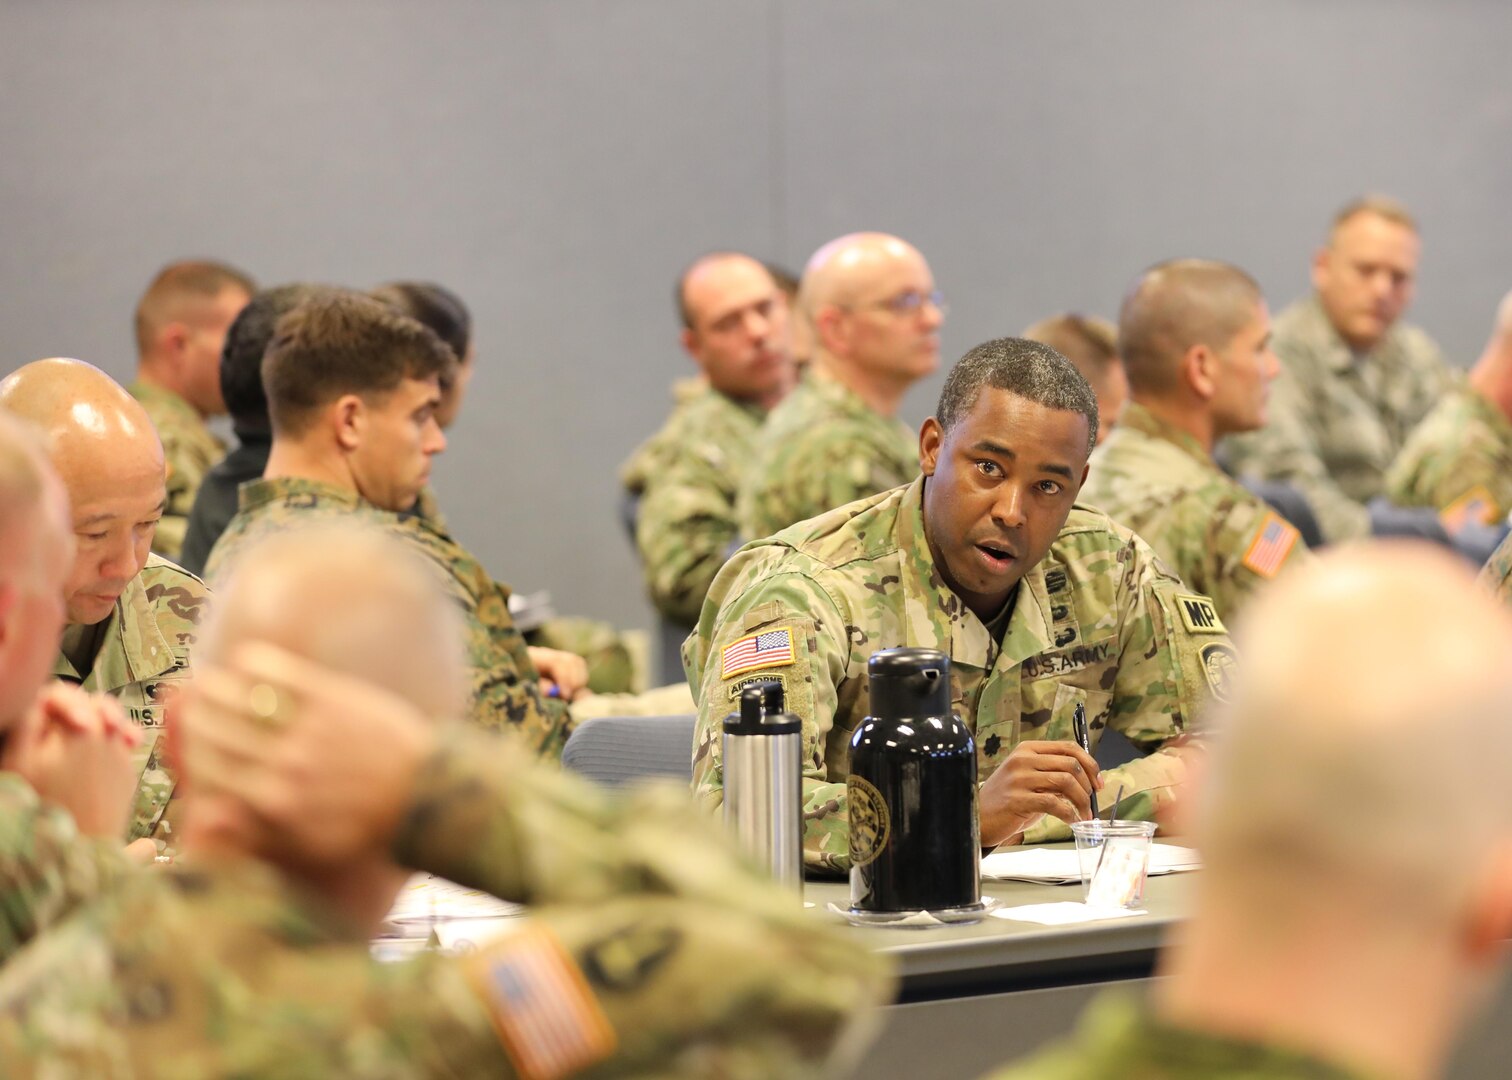 U.S. Army Lt. Col. Maurice Green, deputy commander of the 16th Military Police Brigade, Fort Bragg, N.C., speaks to the panel of JTF-CS Mission Planning Conference (MPC) at Fort Eustis, Va., Dec 4, 2018. Senior leaders and representatives from 26 units across the United States and Canada attended the two-day conference. The MPC prepared and strengthened communication roles of the Defense Chemical, Biological, Radiological and Nuclear (CBRN) Response Force (DCRF) and other DoD CBRN Response Enterprise (CRE) entities for participation in response operations. In the event of a catastrophic CBRN incident, the JTF-CS and DCRF missions assist local, state, federal and tribal partners in saving lives, preventing further injury, and providing critical support to enable community recovery when conducting Defense Support of Civil Authorities response operations. (DoD photo by U.S. Air Force Tech. Sgt. Michael Campbell/ Released)